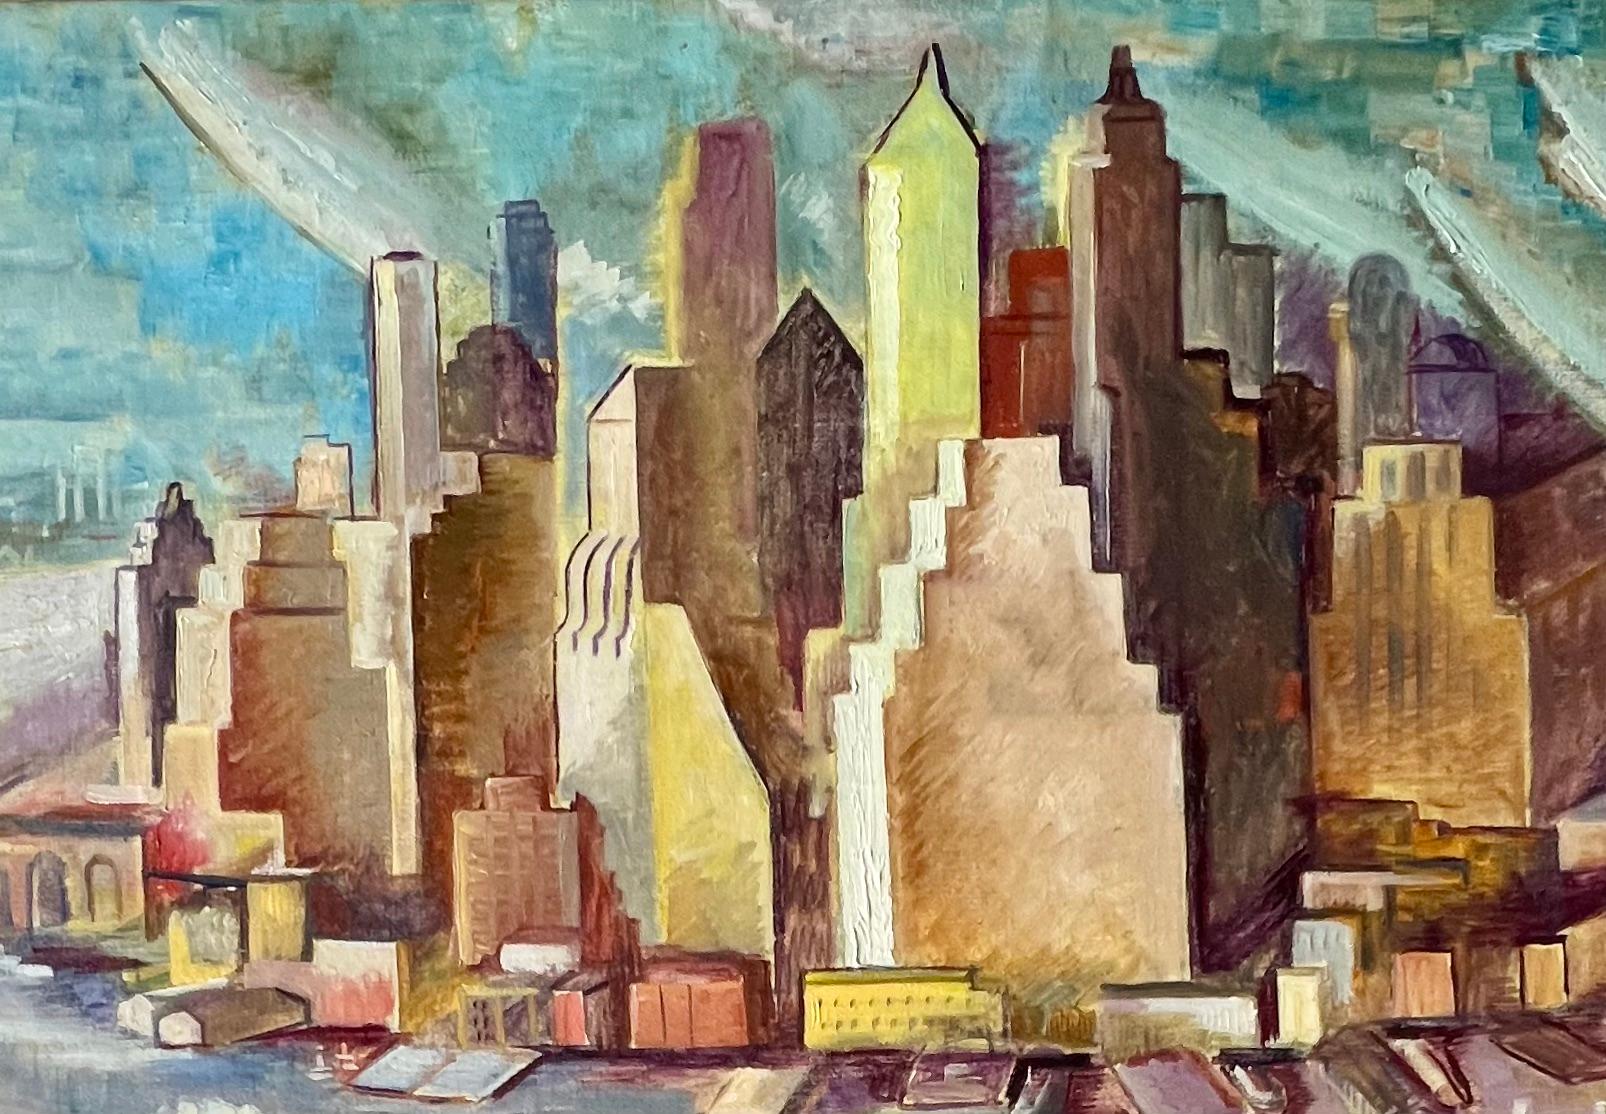 Lower Manhattan American Modernism NYC Cityscape Social Realism WPA 20th Century

Jo Cain (1904 - 2003)
Lower Manhattan
34 1/4 x 42 ½ inches
Oil on canvas c. 1930s
Signed lower right
41 x 49 inches framed

Our gallery is pleased to present the